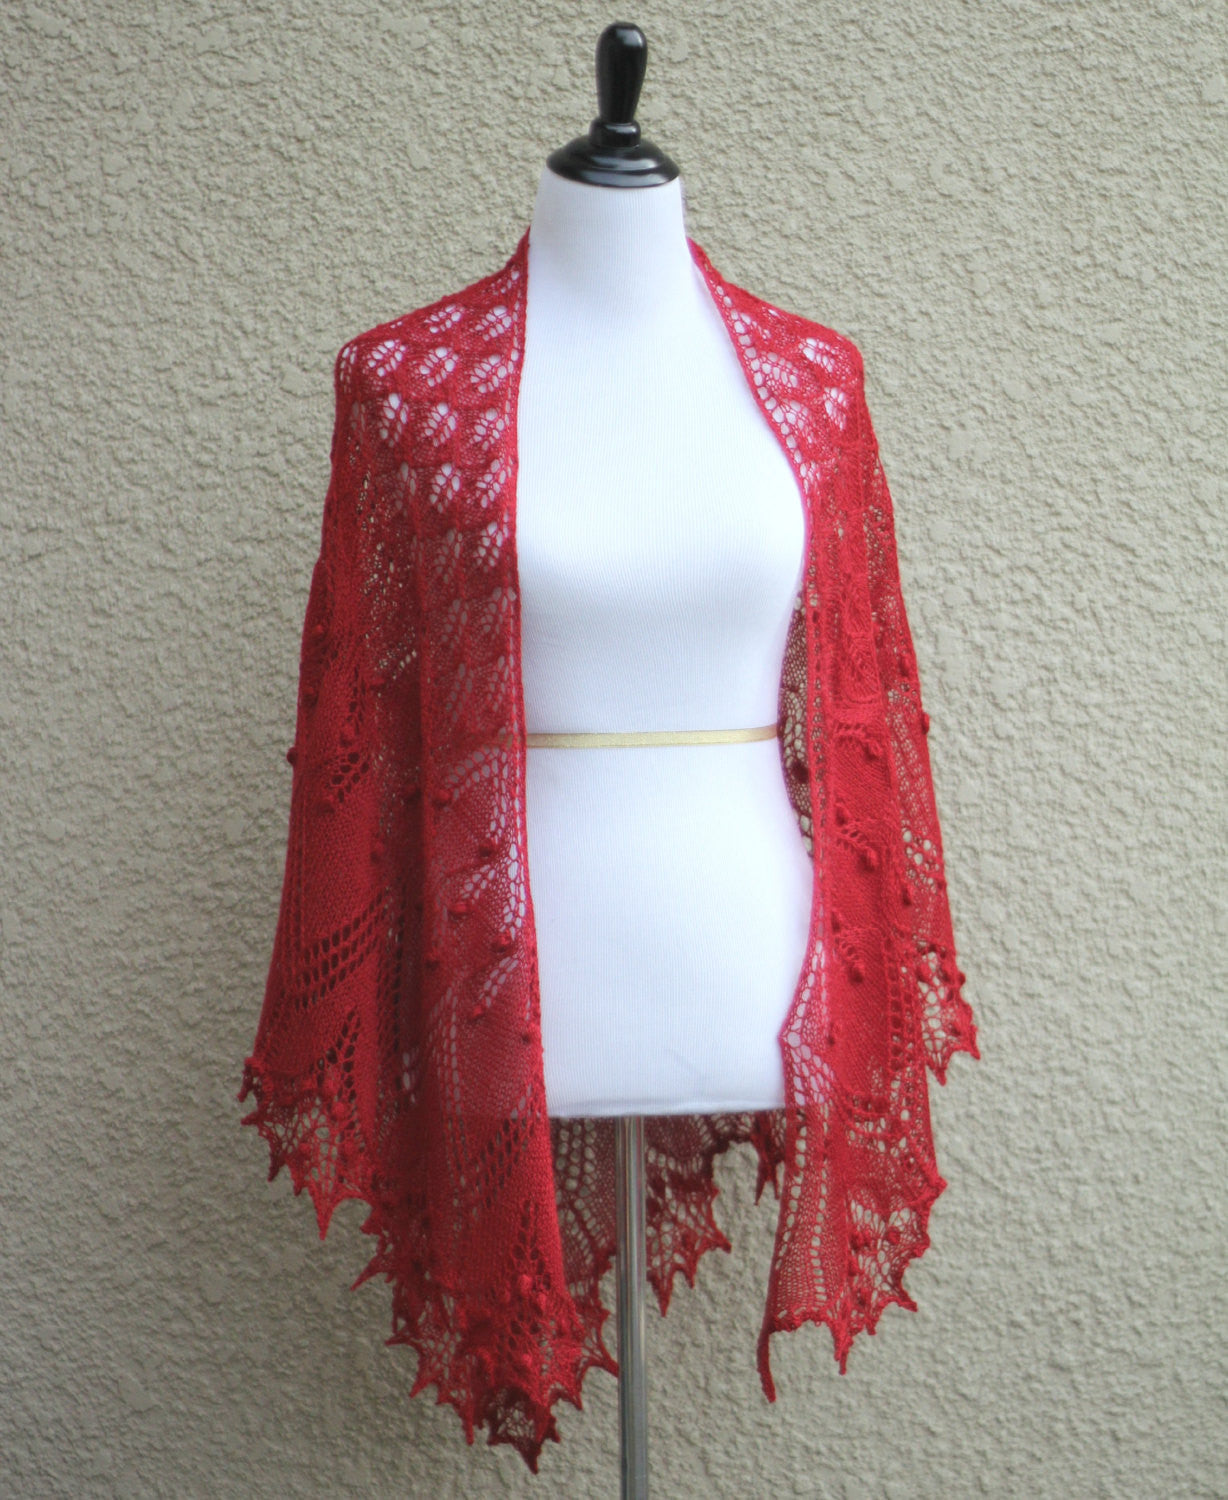 Knit shawl in red color with nupps, lace shawl, gift for her (22 colors available)